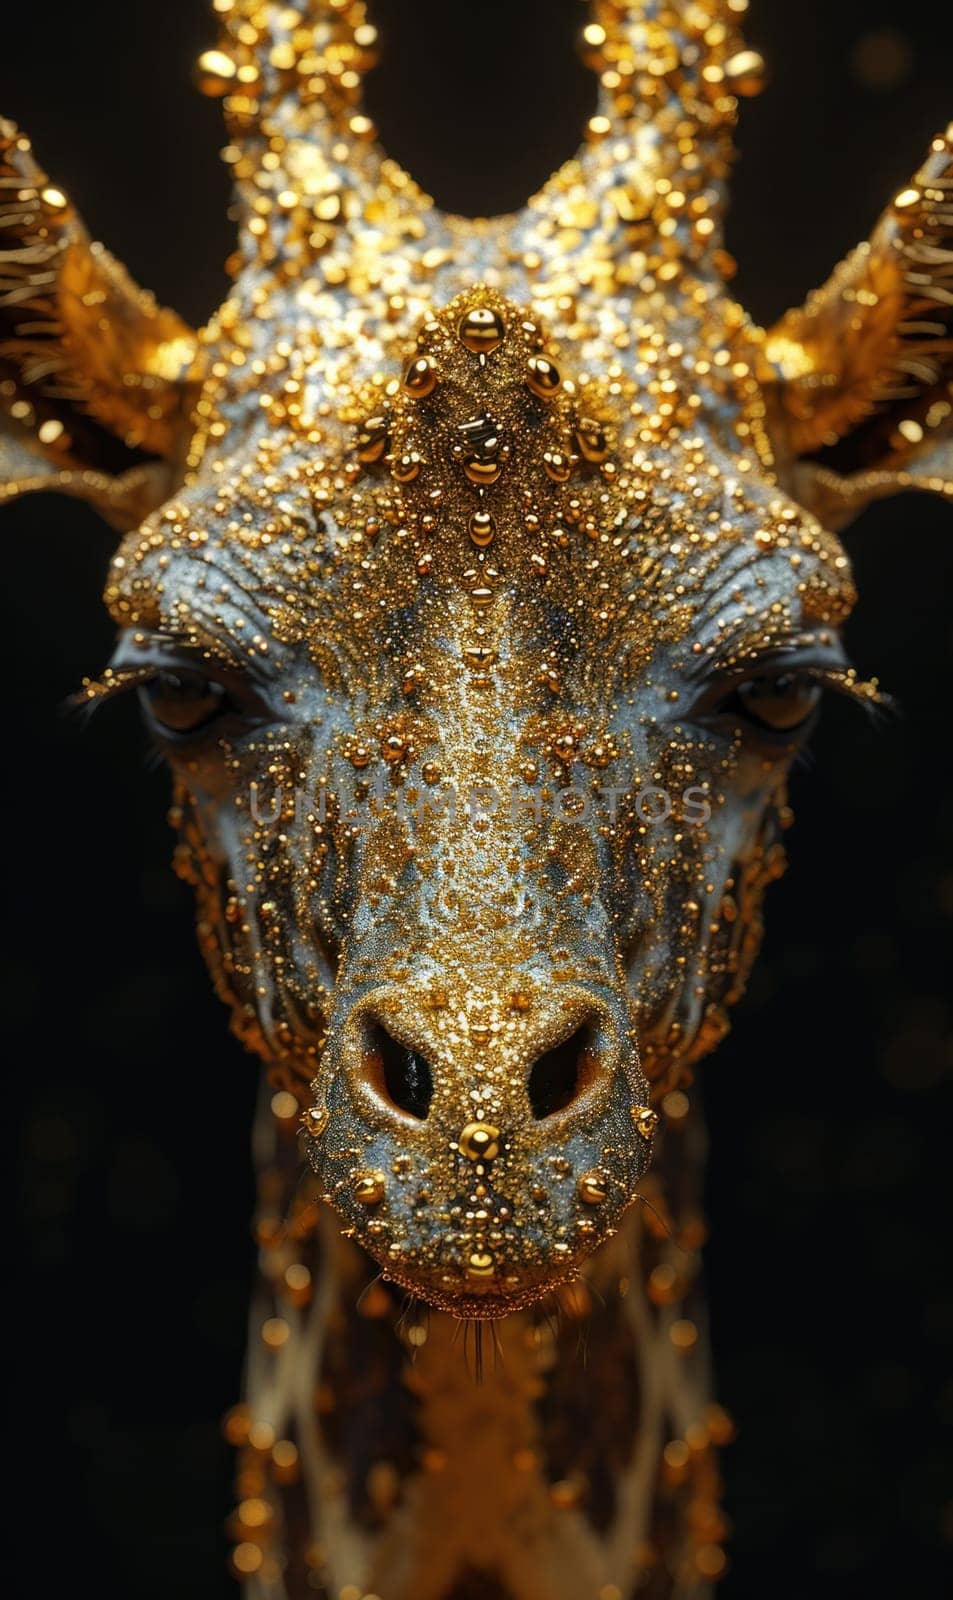 A close up of a giraffe with gold and silver decorations, AI by starush